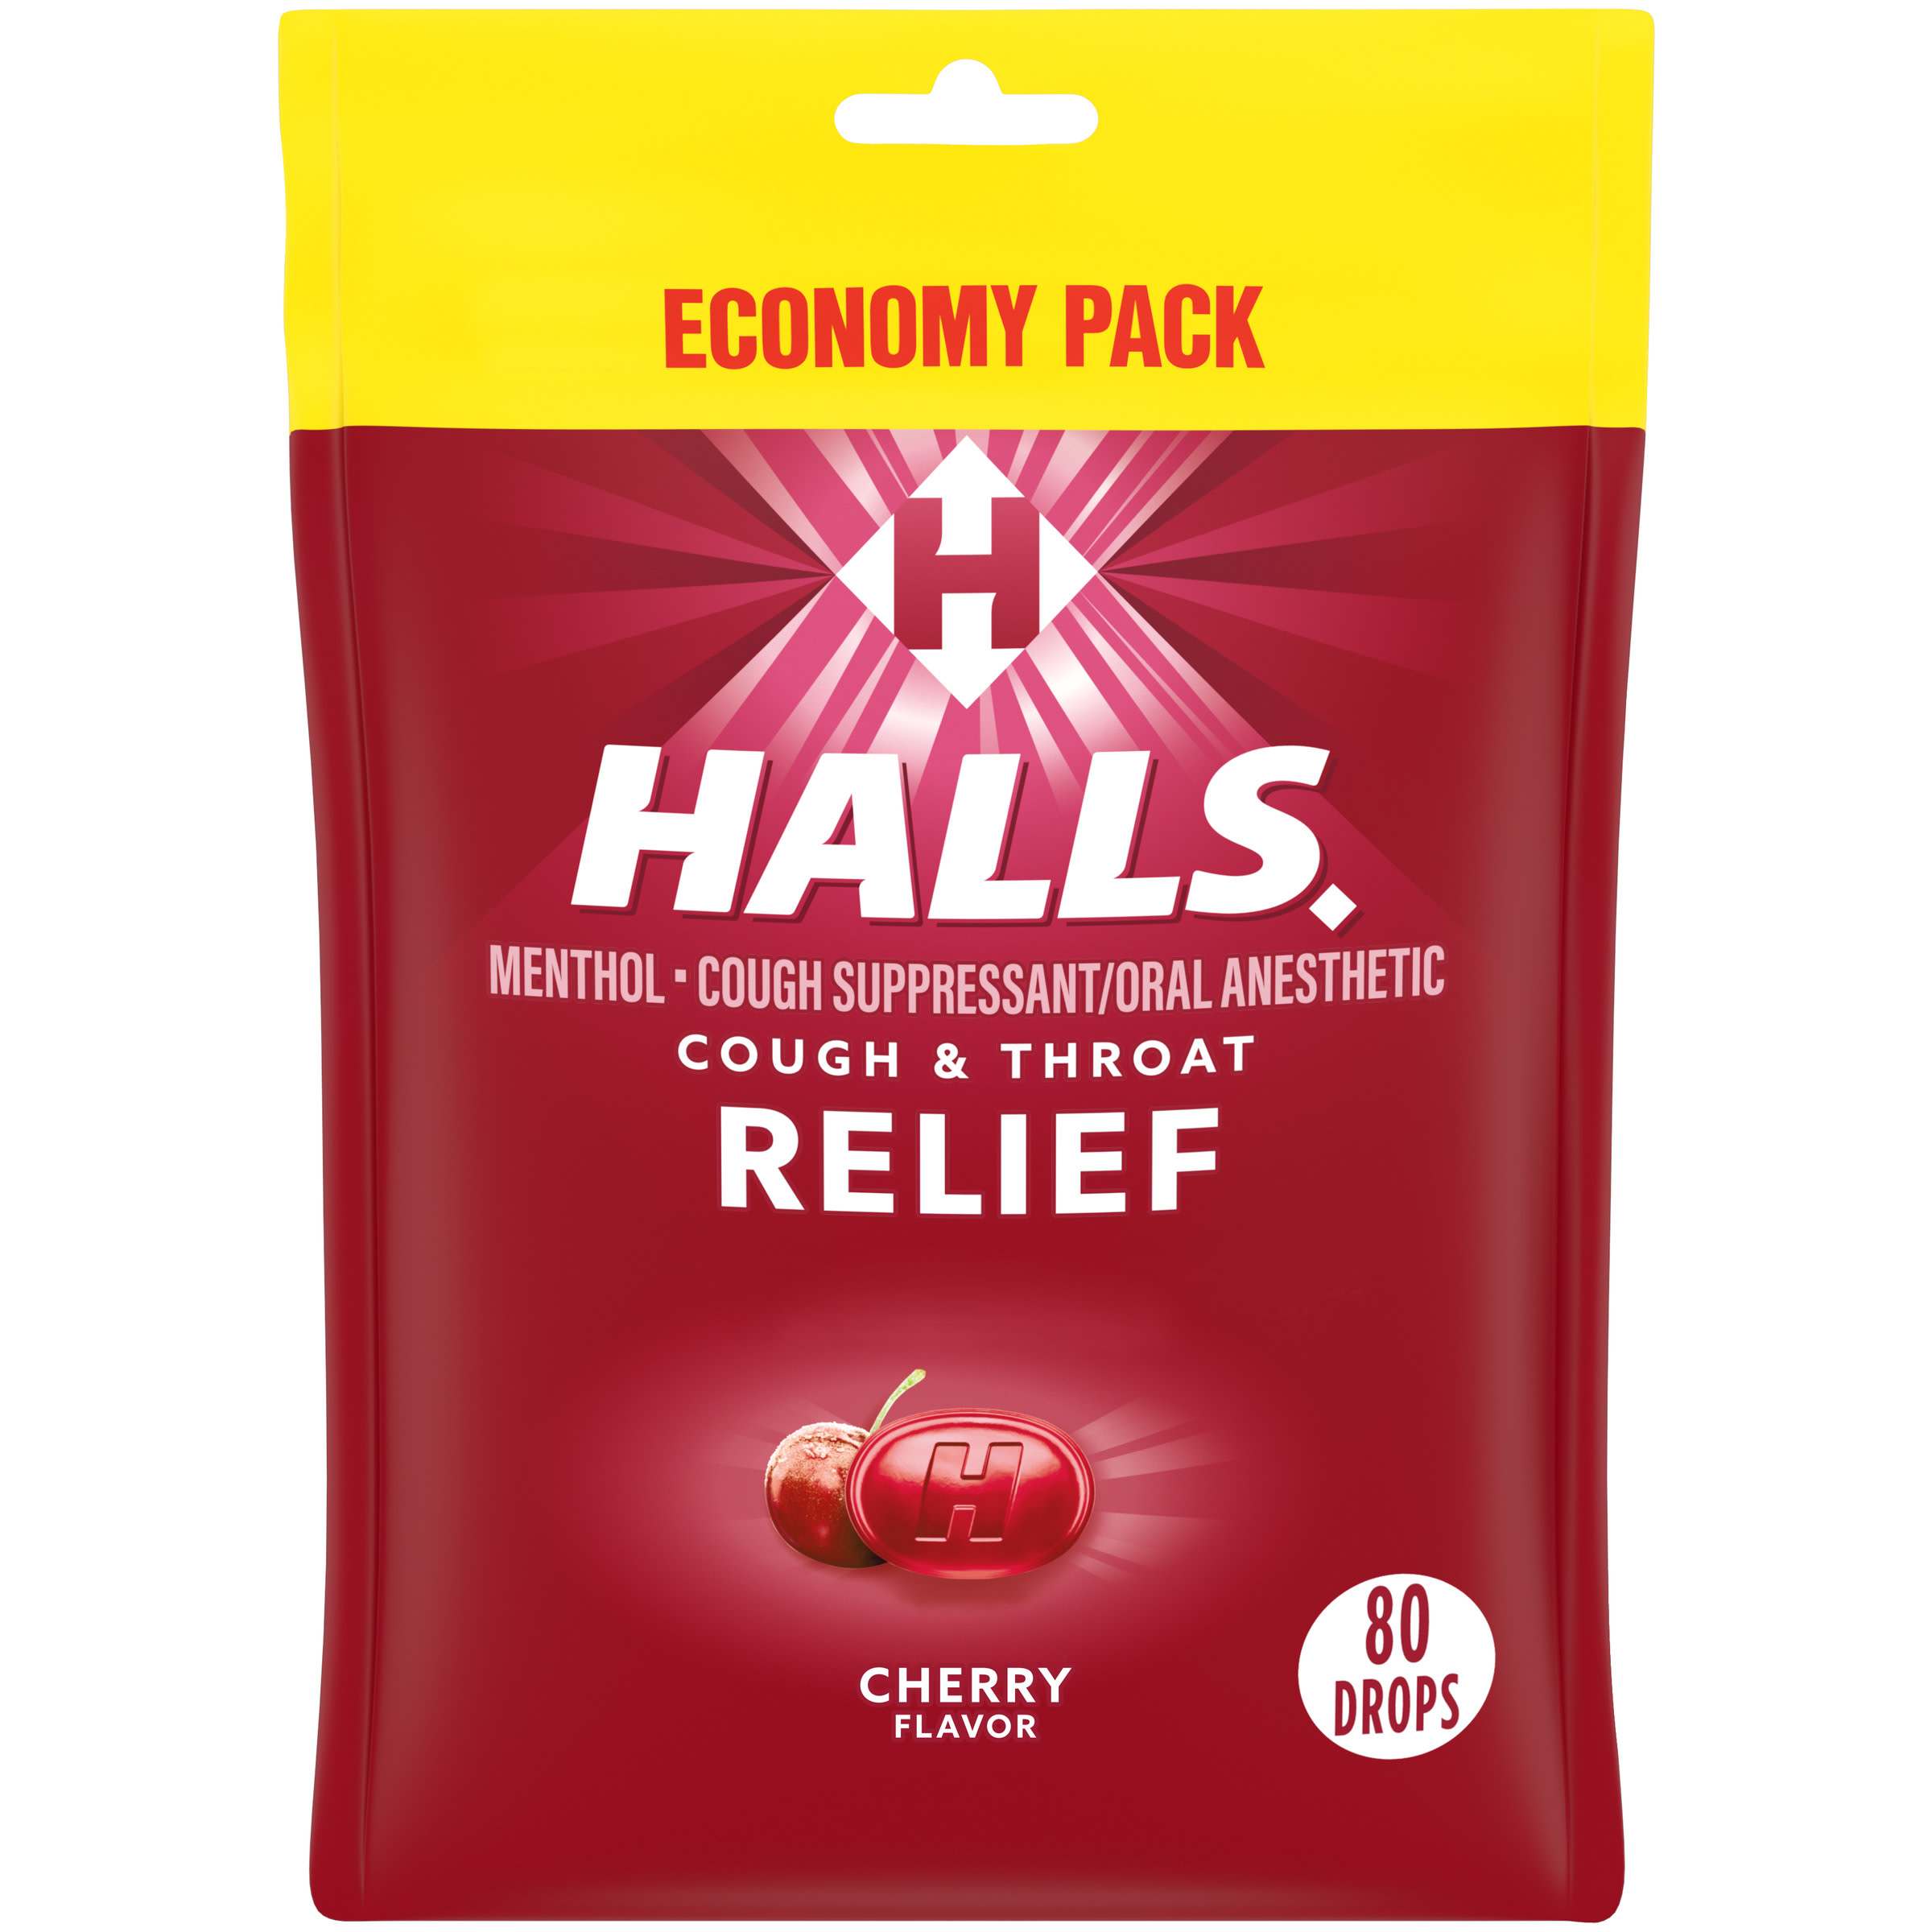 HALLS Relief Cherry Cough Drops, Economy Pack, 80 Drops - image 1 of 12